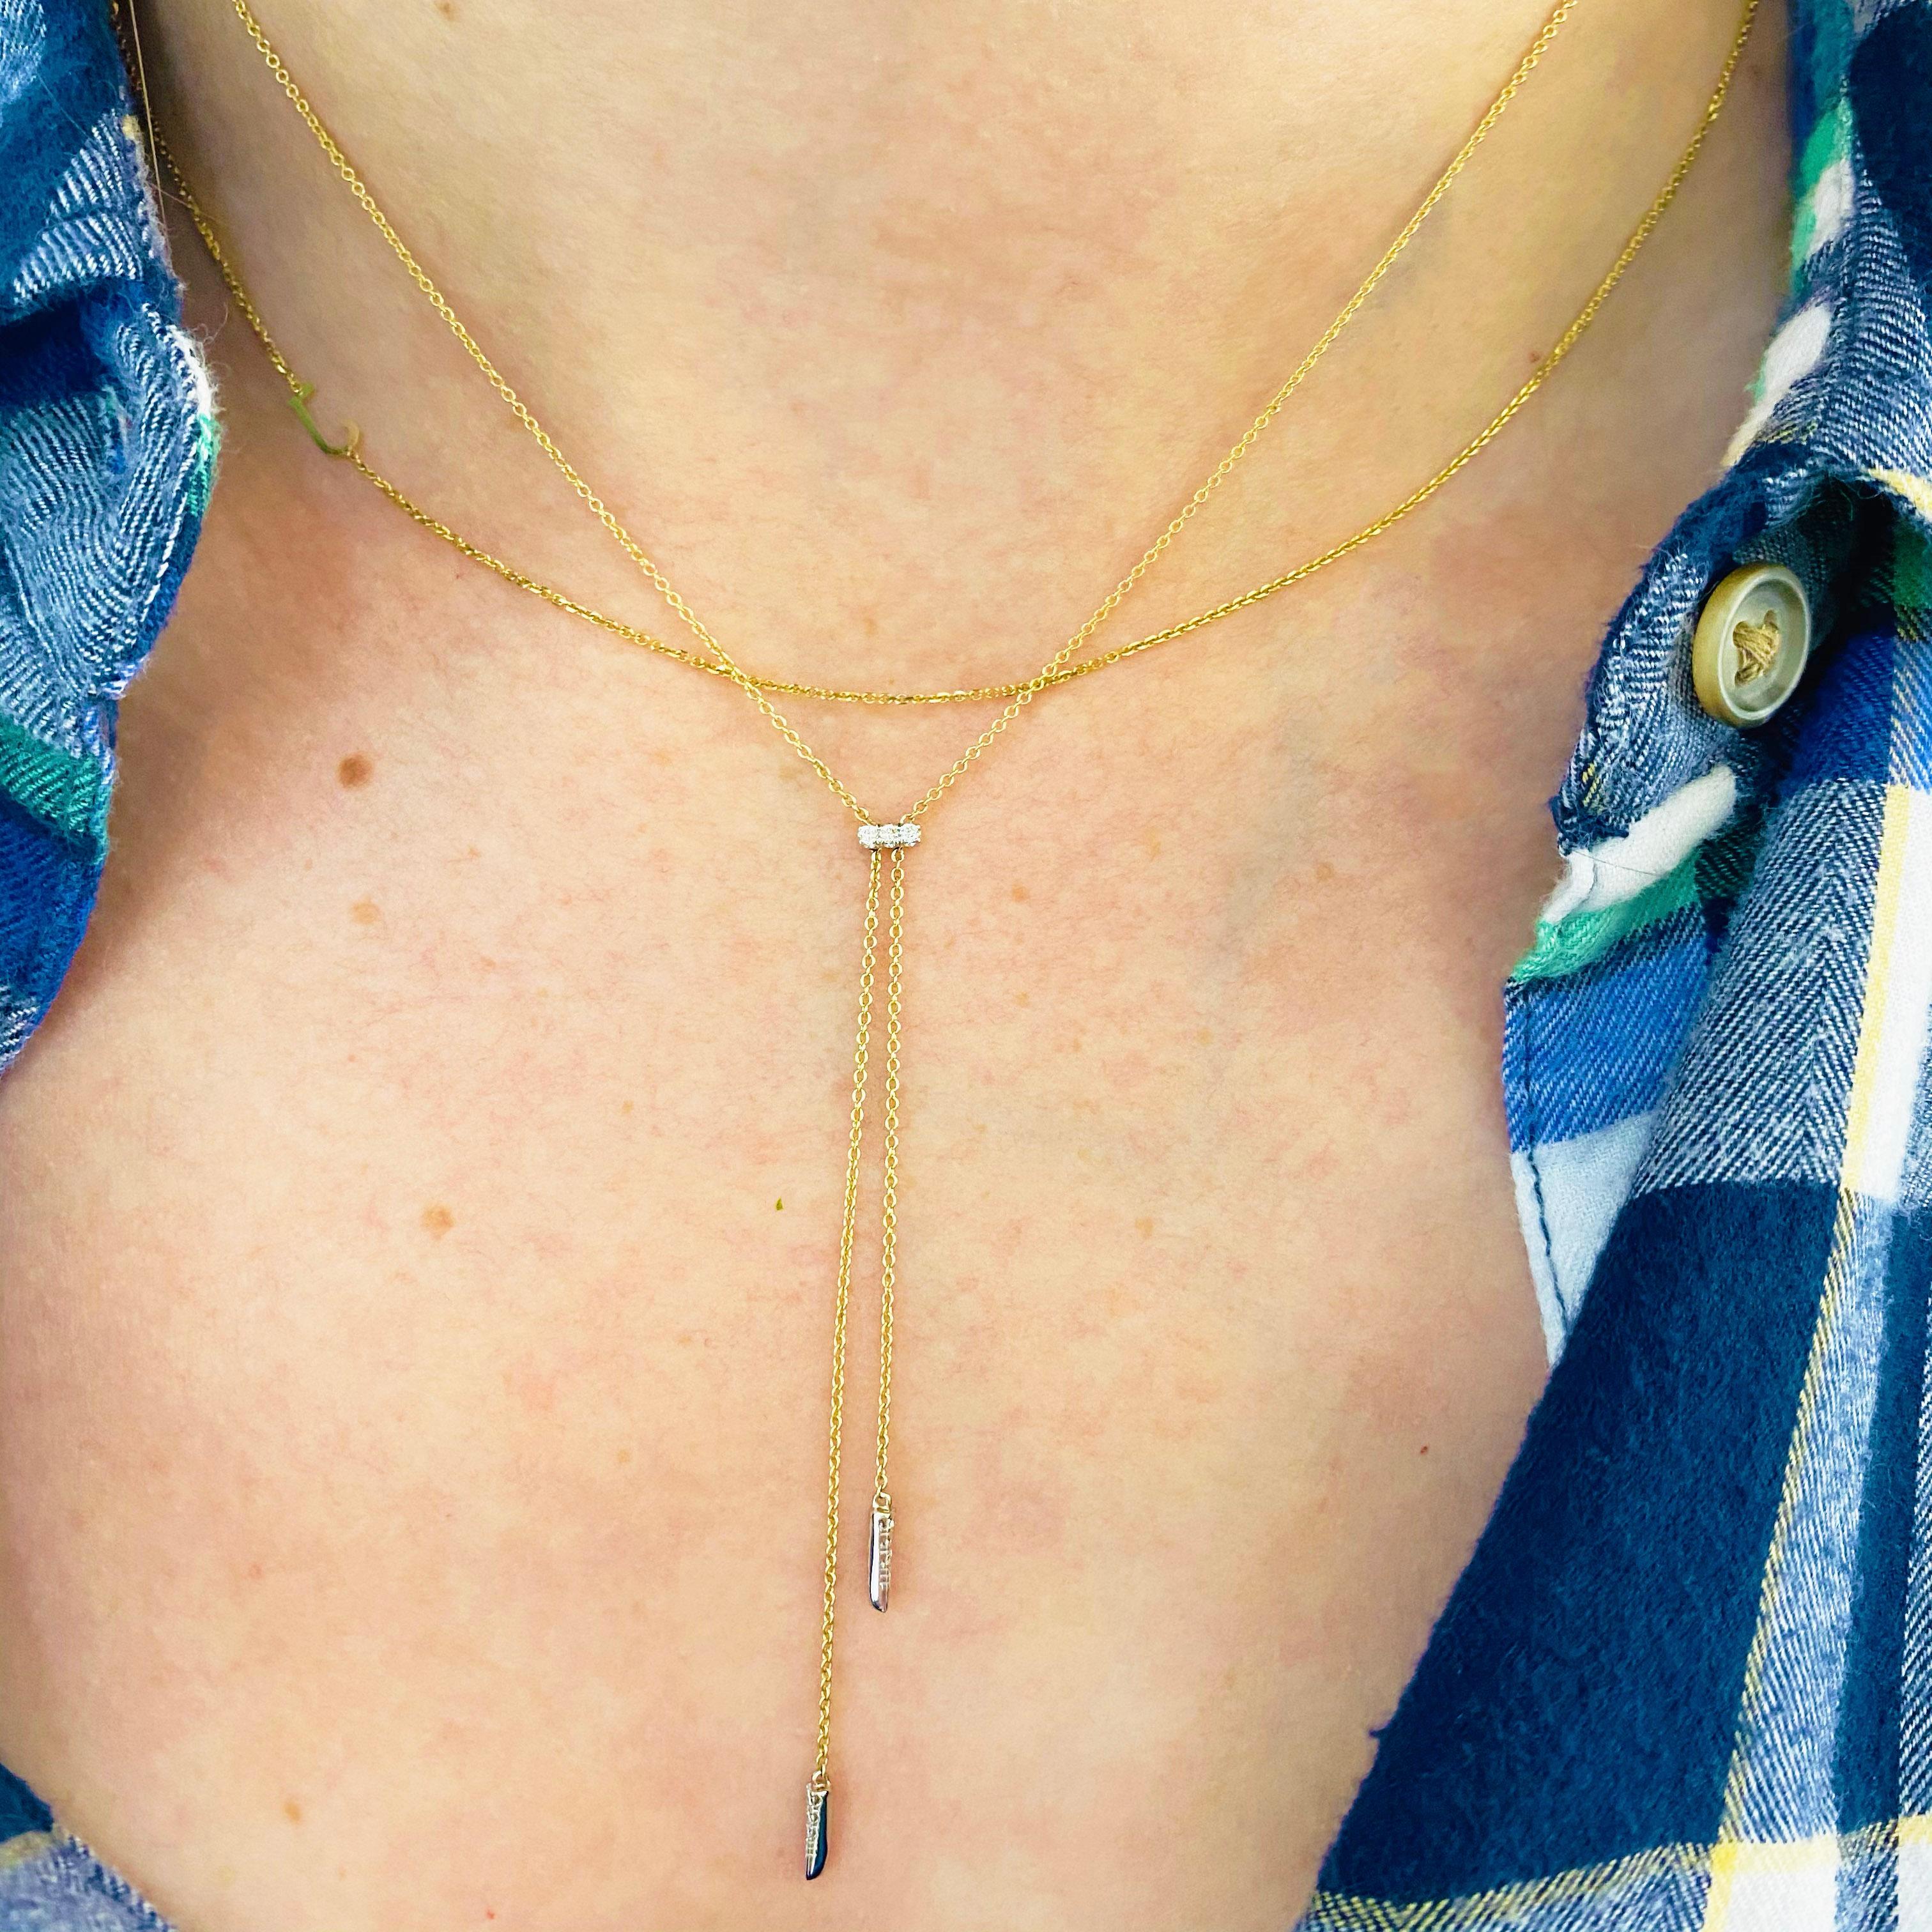 This stunningly beautiful 14k yellow and white gold adjustable lariat necklace dripping with diamonds provides a look that is very modern yet classic! This necklace is very fashionable and can add a touch of style to any outfit, yet it is also